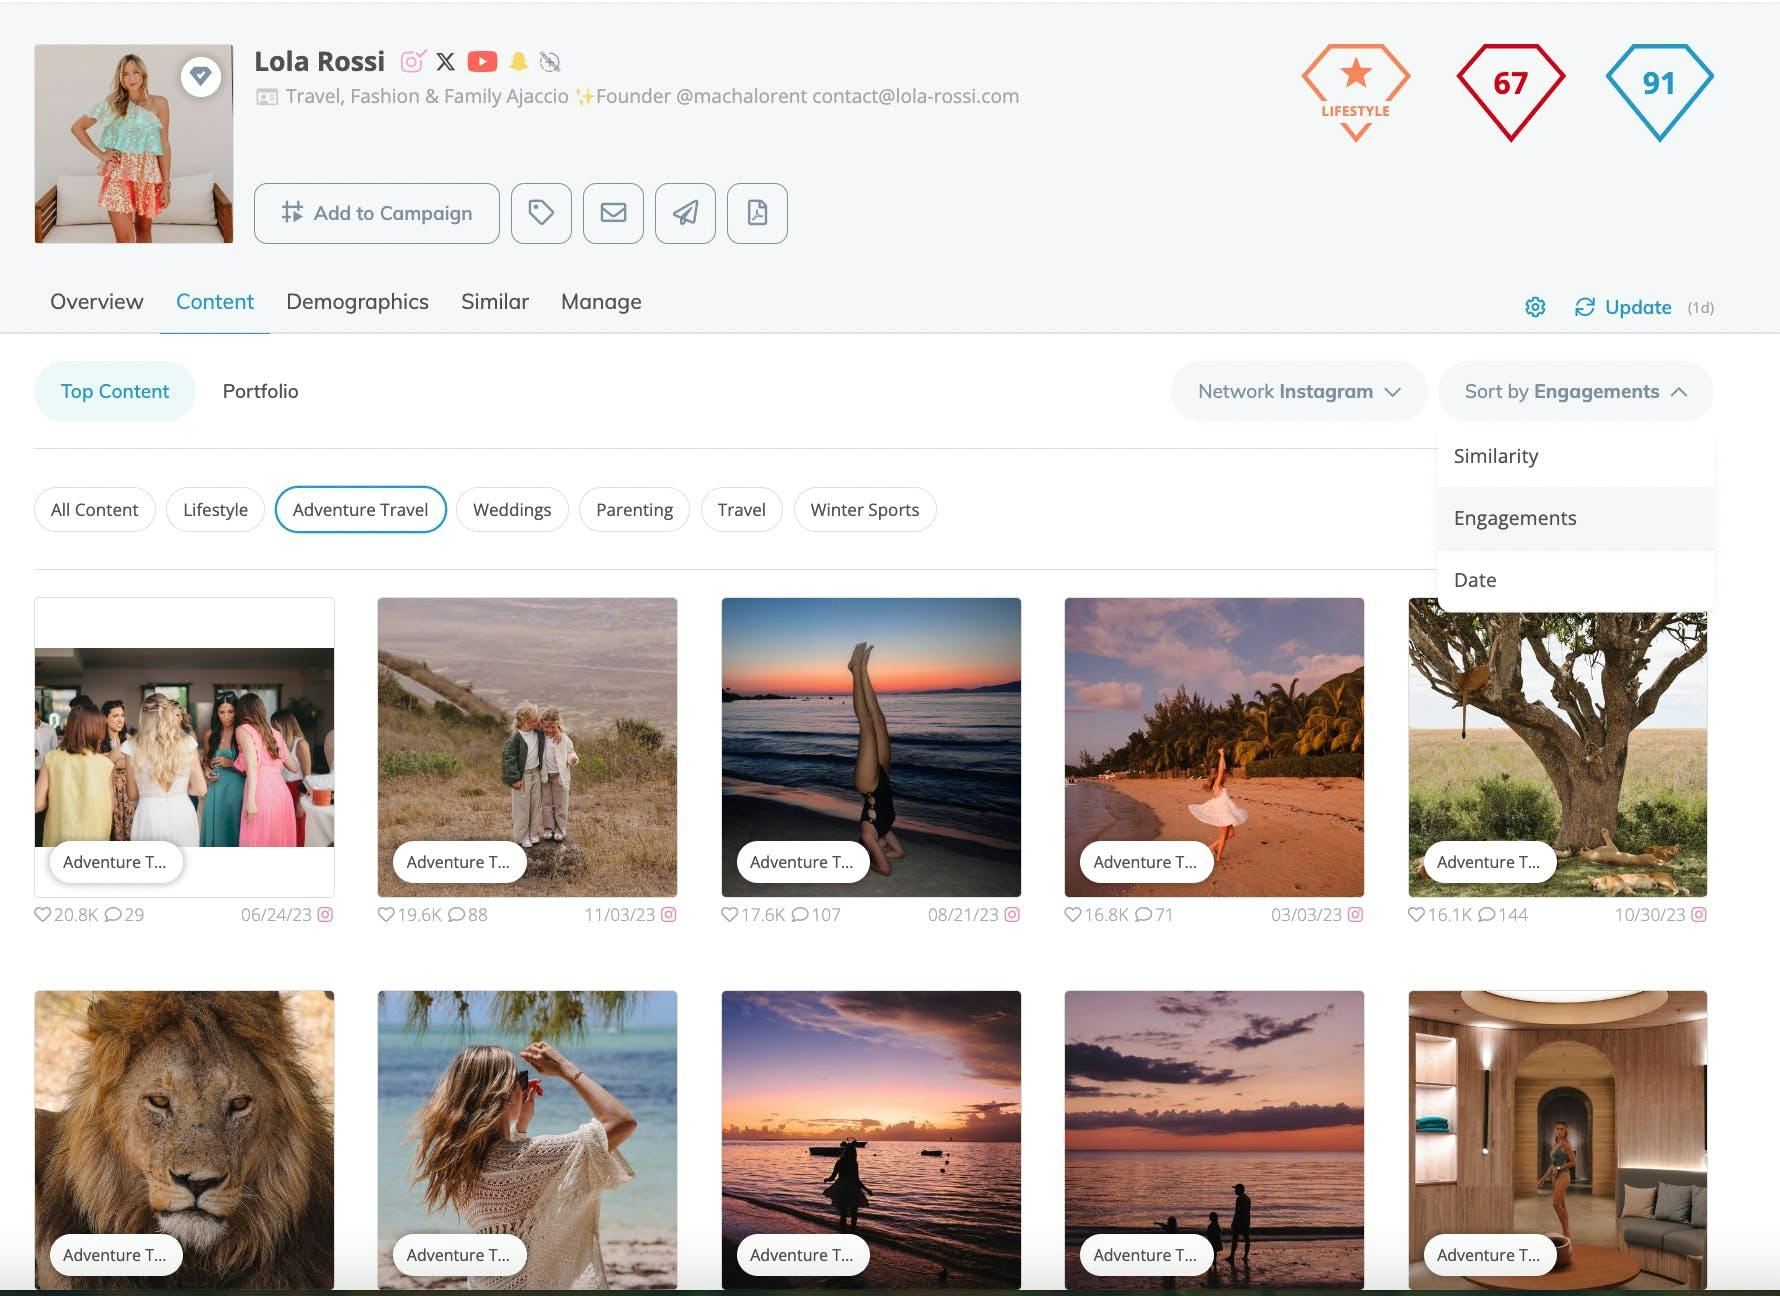 Klear: Vet Influencer Content Using Topic Filters